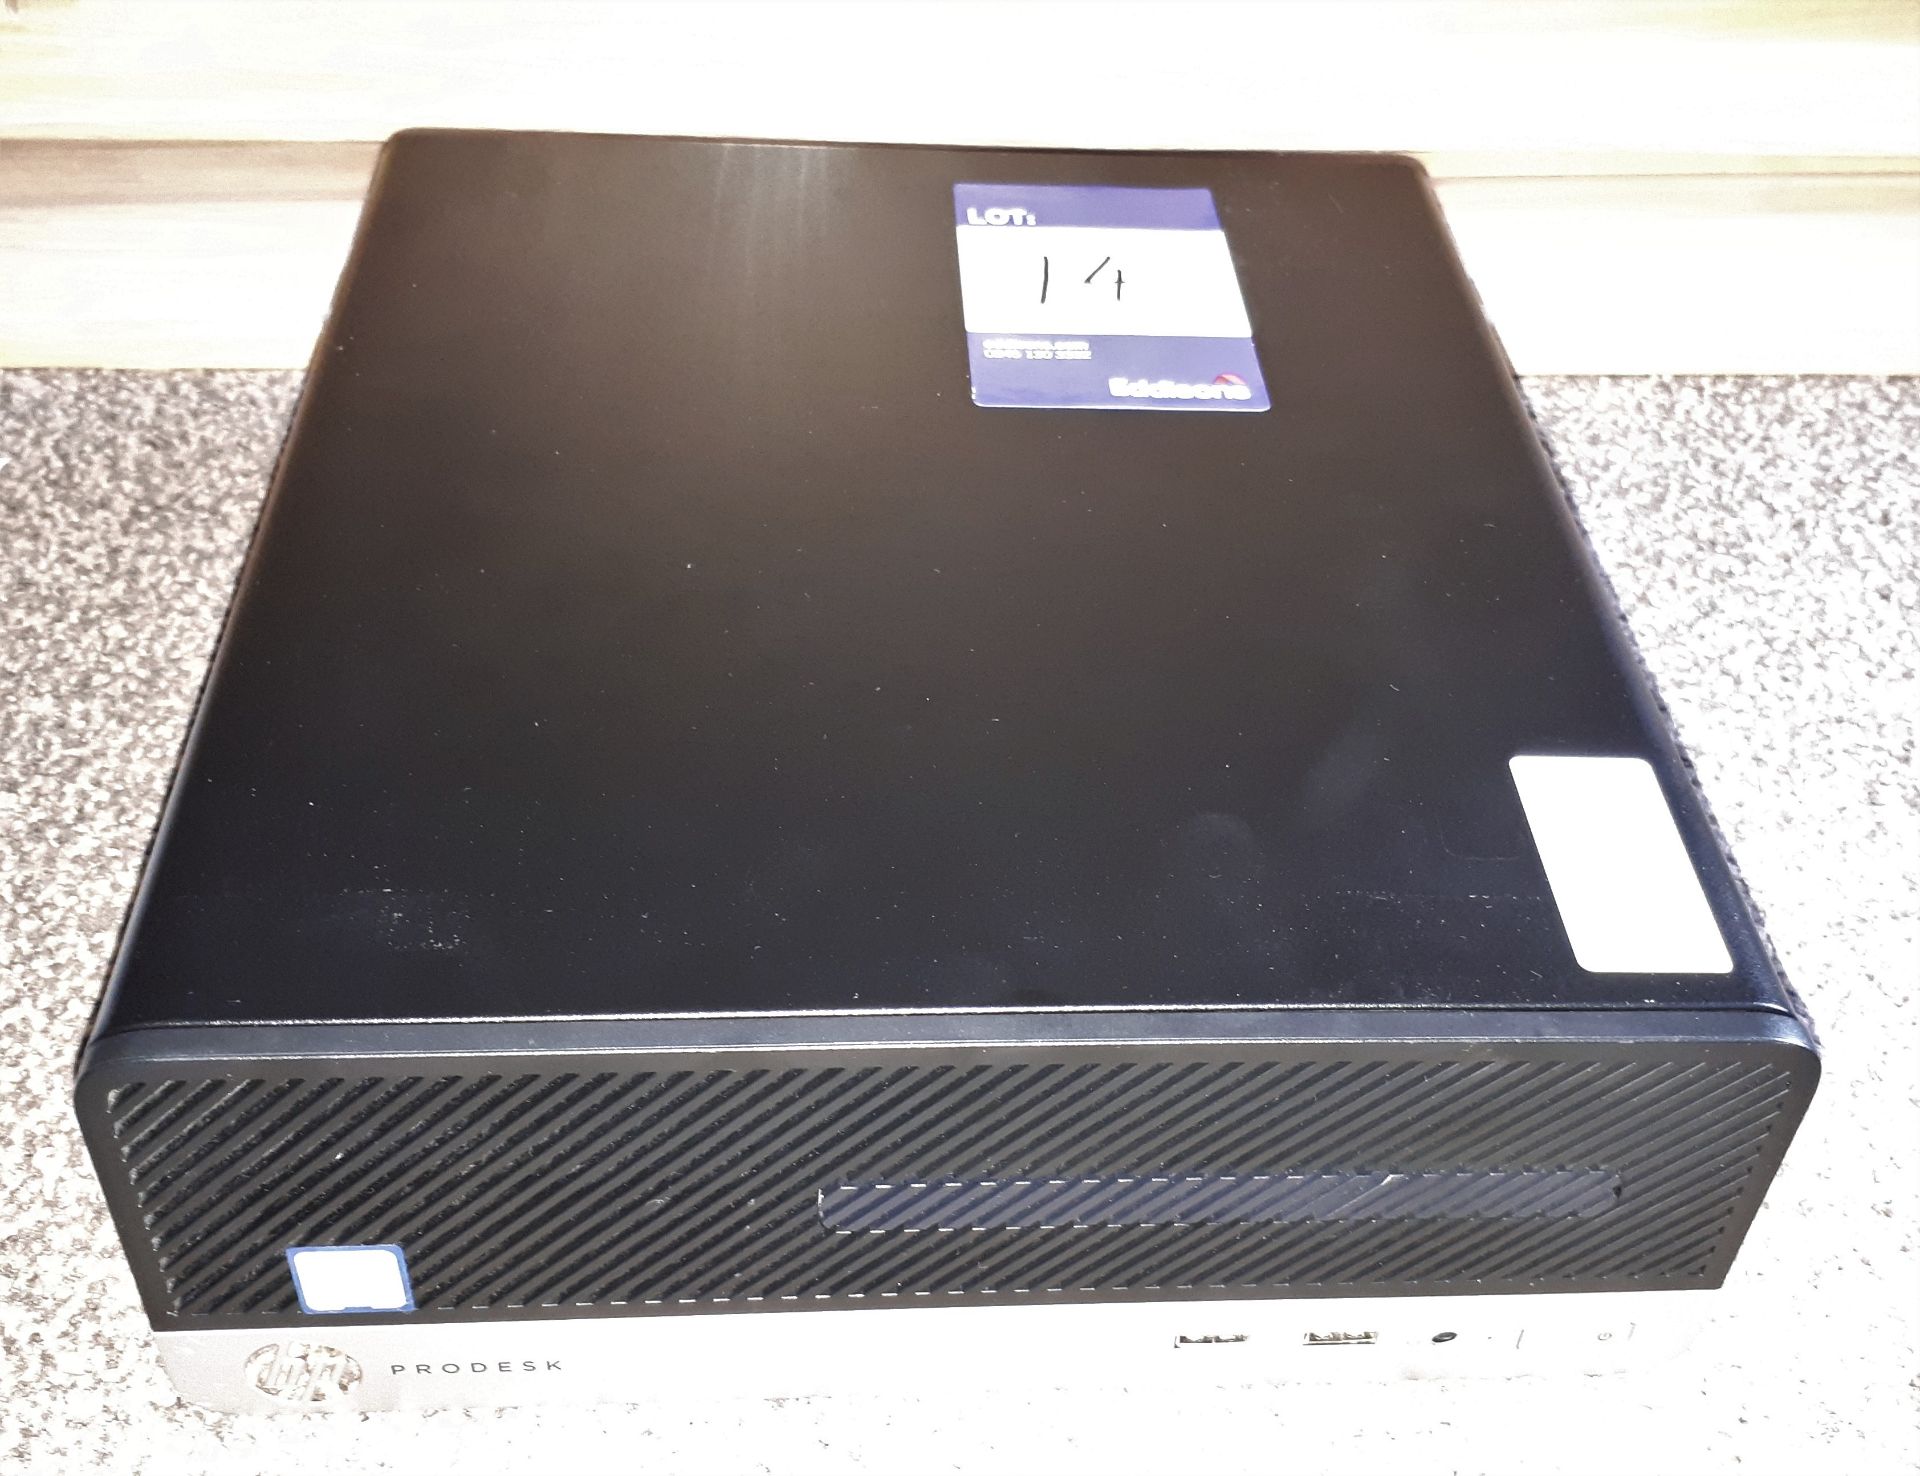 HP ProDesk 400 G4 SFF Business PC, Serial Number C